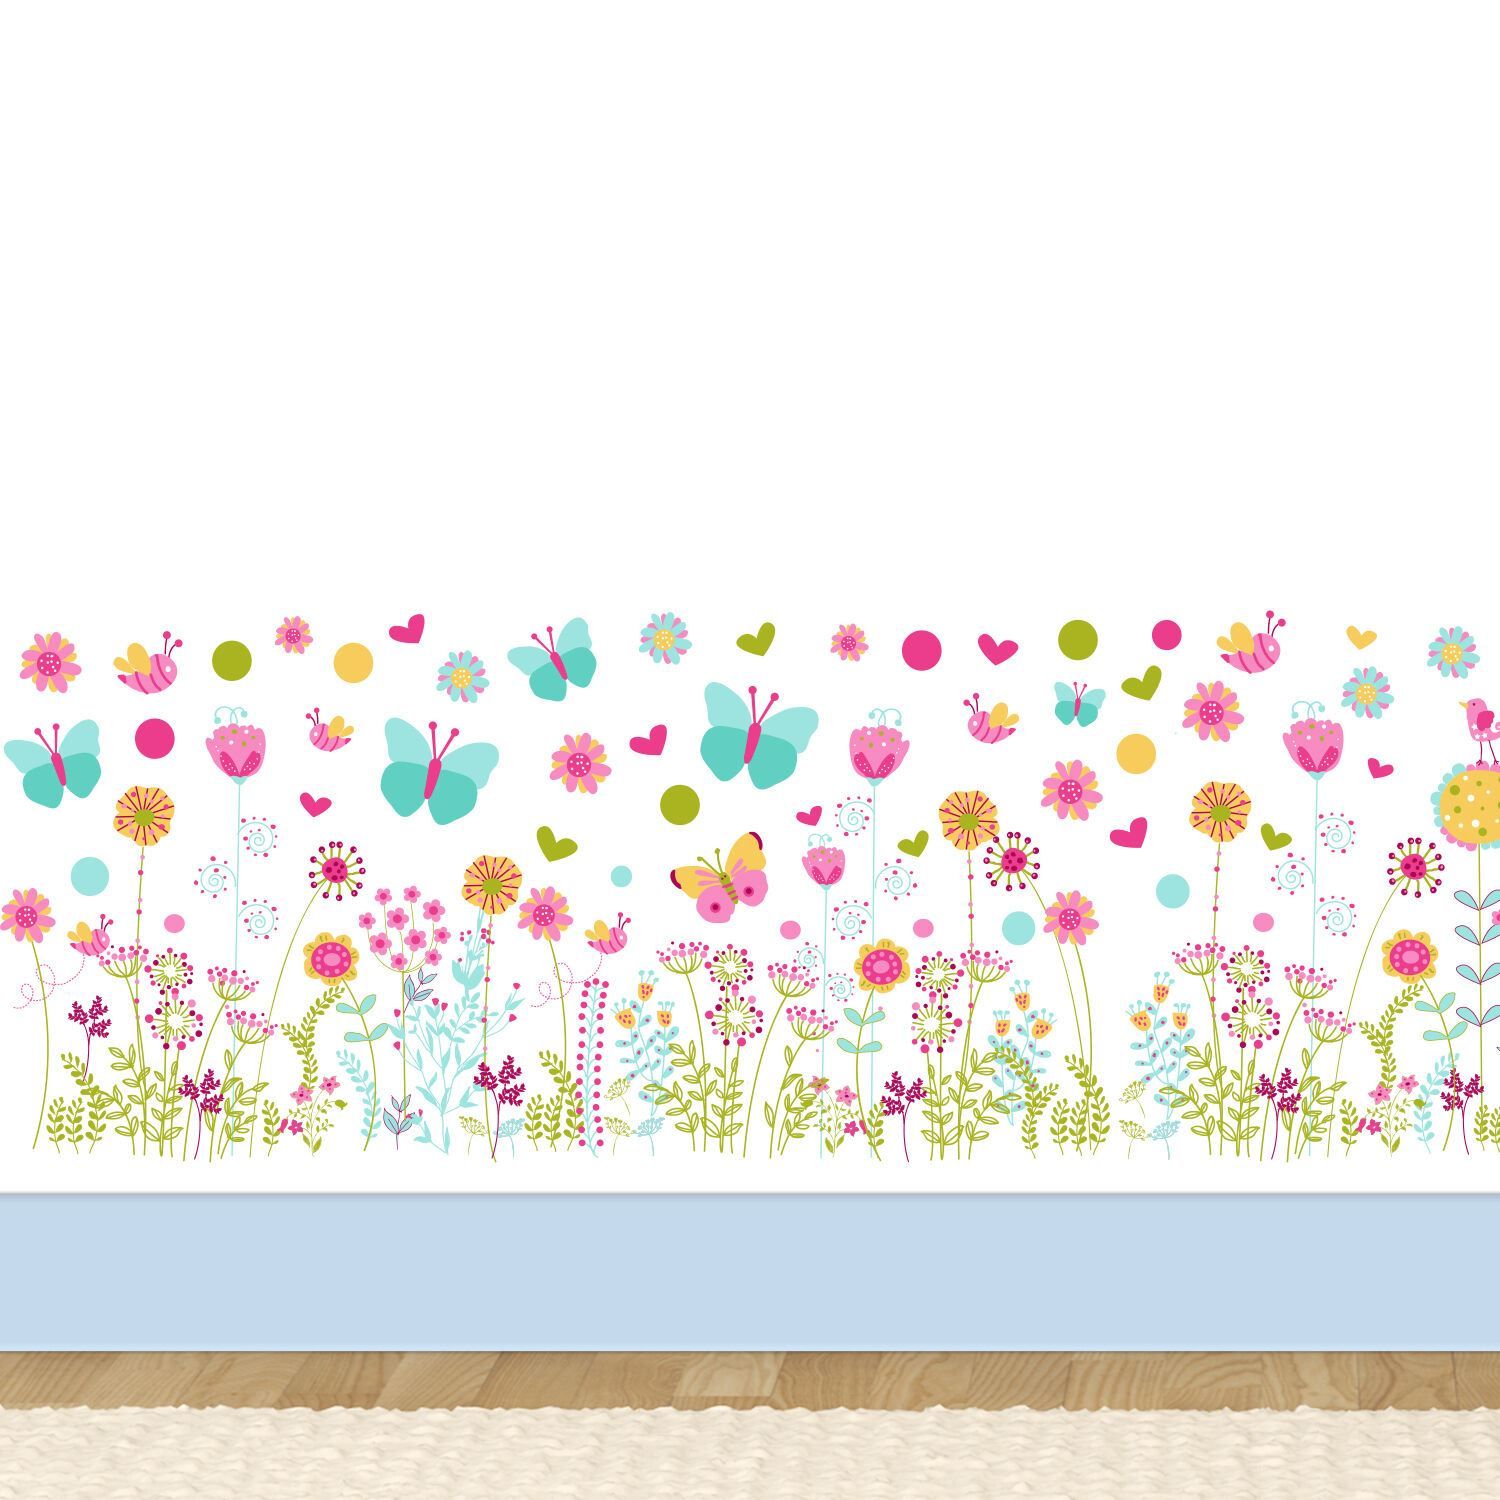 - Every summer has its own story, and ours starts with colourful flowers and beautiful butterflies. 
- This skirting will change your room into a place of joy happiness and summertime.
- Walplus high quality self-adhesive stickers are quick to apply, and can be easily removed and repositioned. 
- It will not damage or leave stains on your wall. Simply peel and stick to any smooth or even surface. 
- Please only attach to the painted surface at least three weeks after painting and clean the surface prior to application. 
- The package includes: 2 sheets of 30cm x 60cm. The finishing size is 28cm x 110cm - less or more, depending on your preferences.